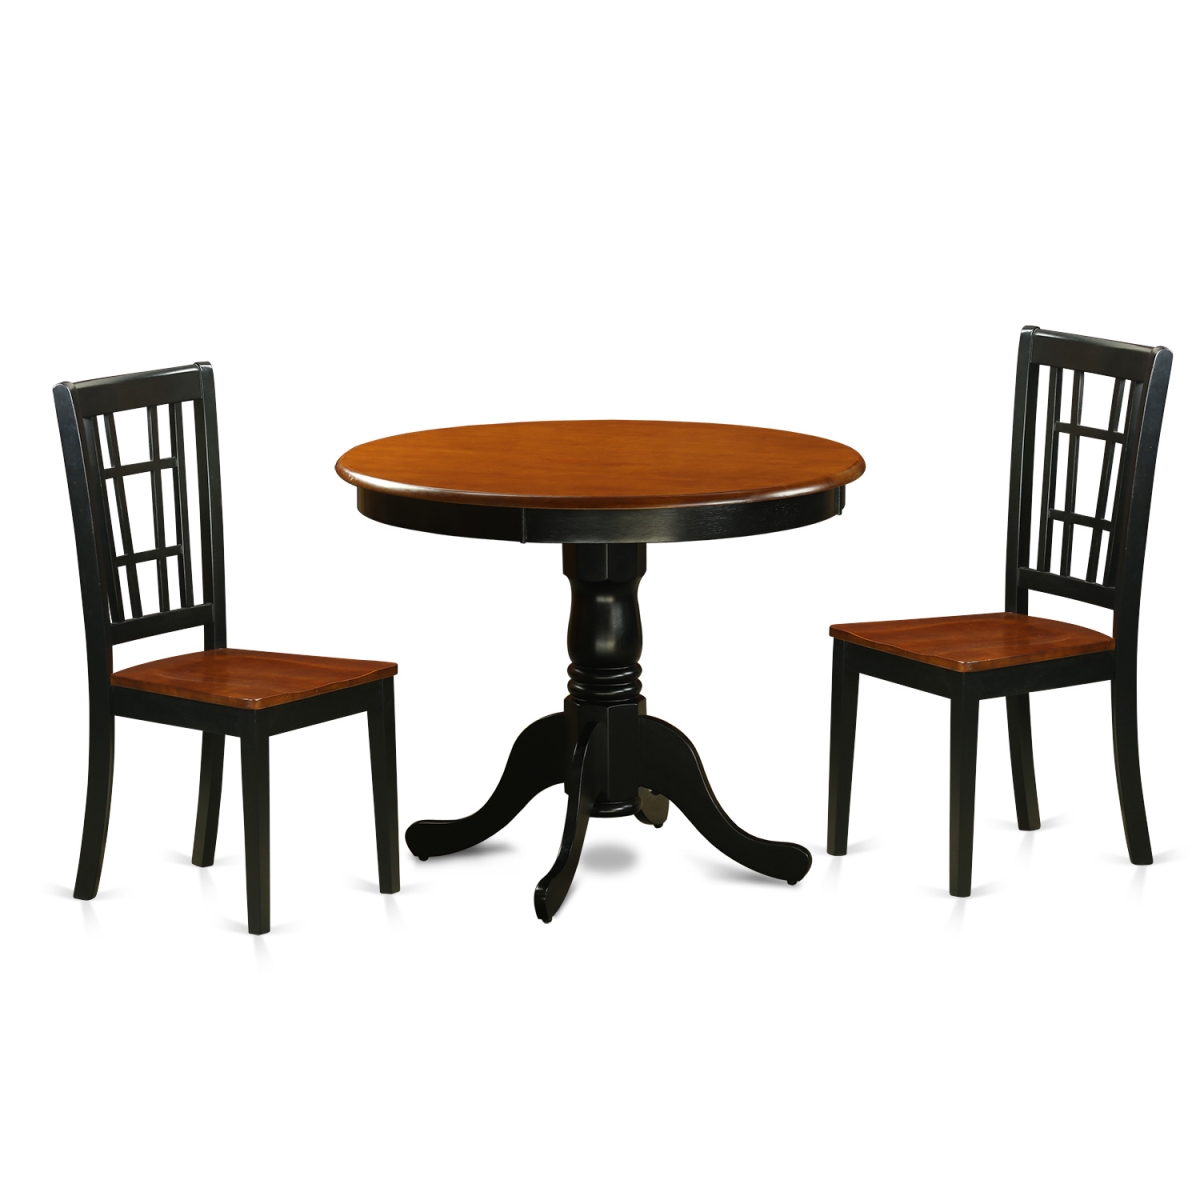 Picture of East West Furniture ANNI3-BLK-W Dining Table with 2 Wood Chairs, Black & Cherry - 3 Piece